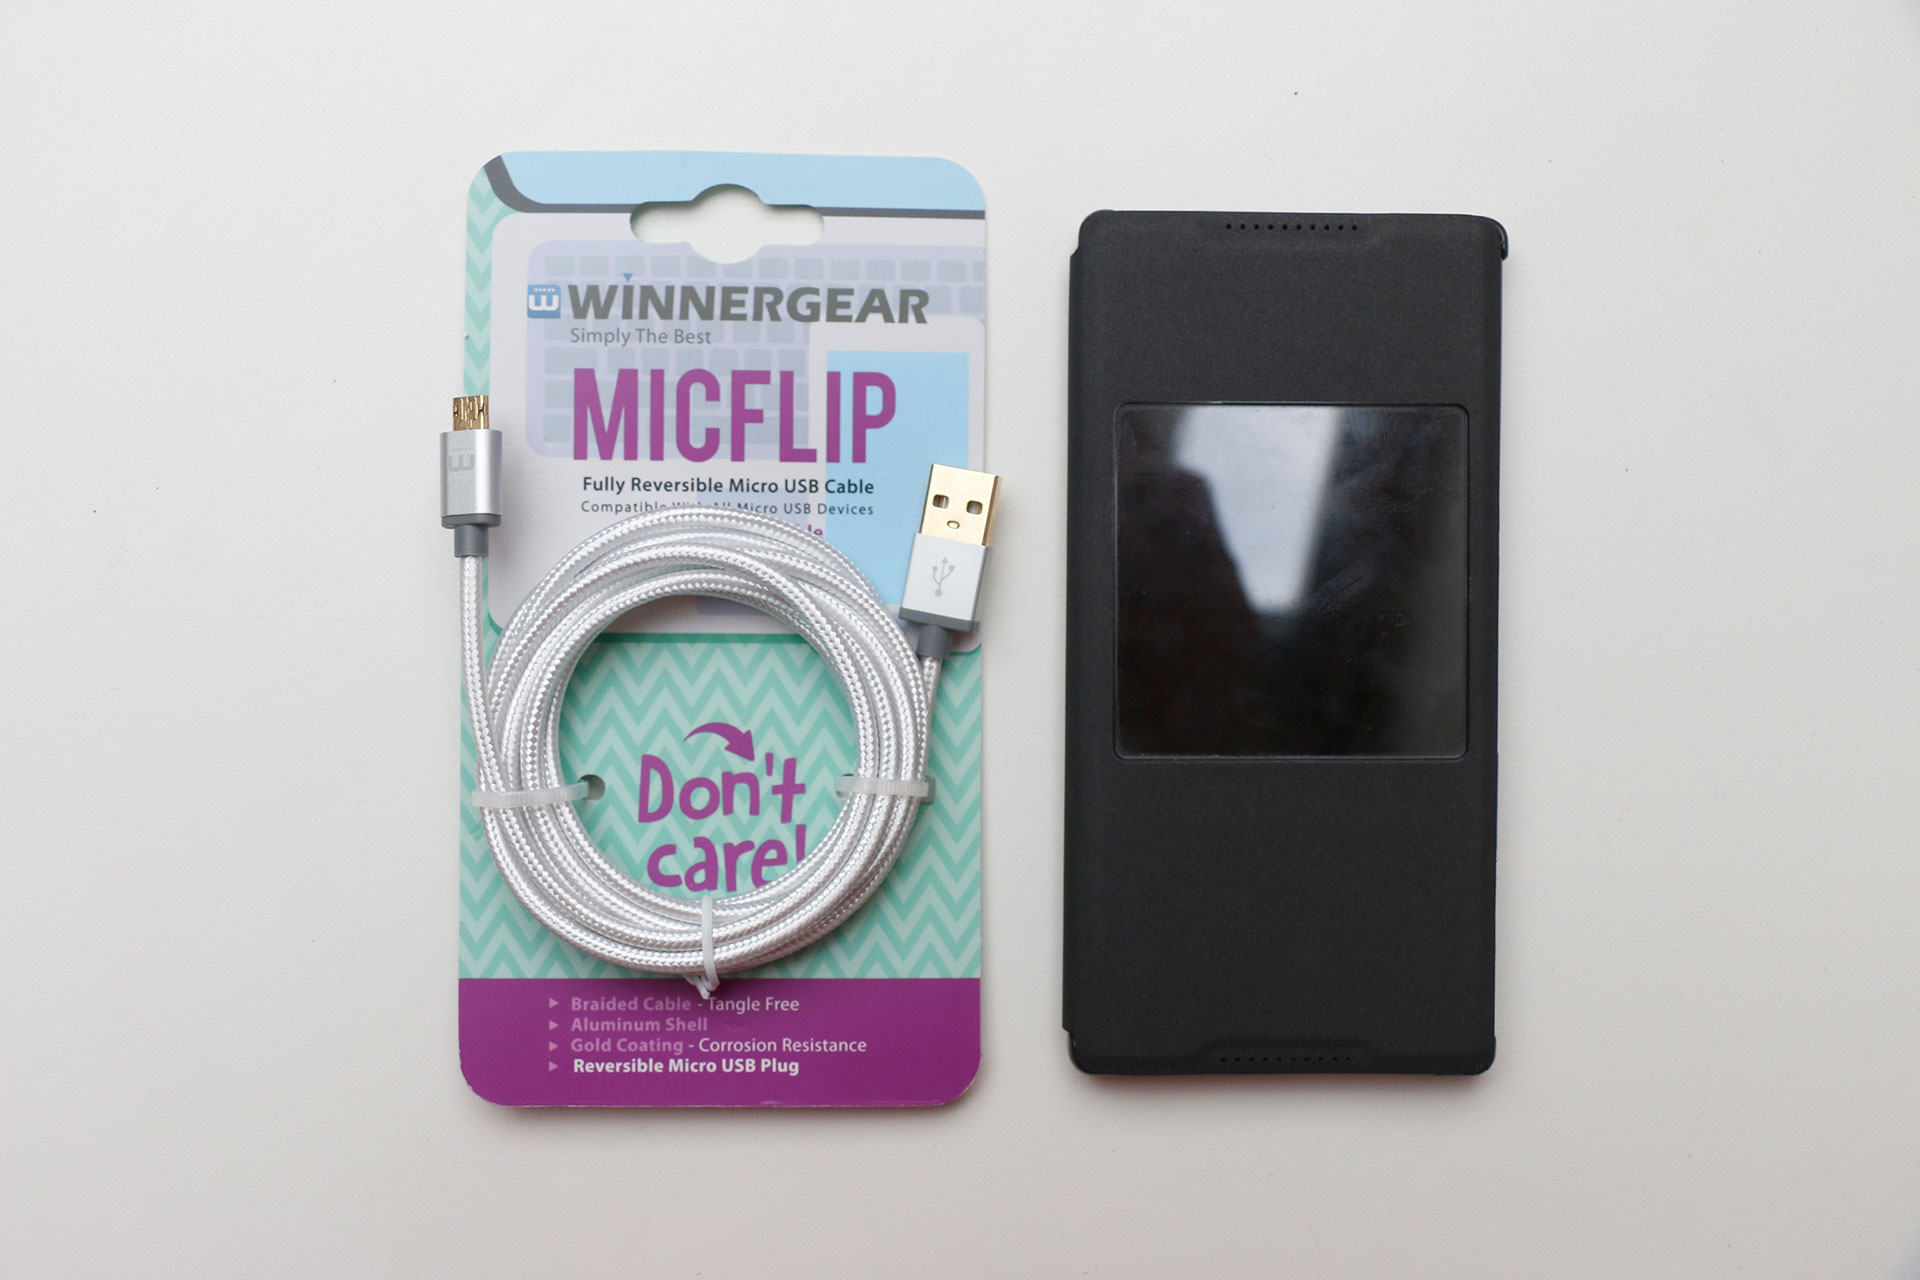 Winnergear-MicFlip-Fully-Reversible-Micro-USB-Cable-Unboxing